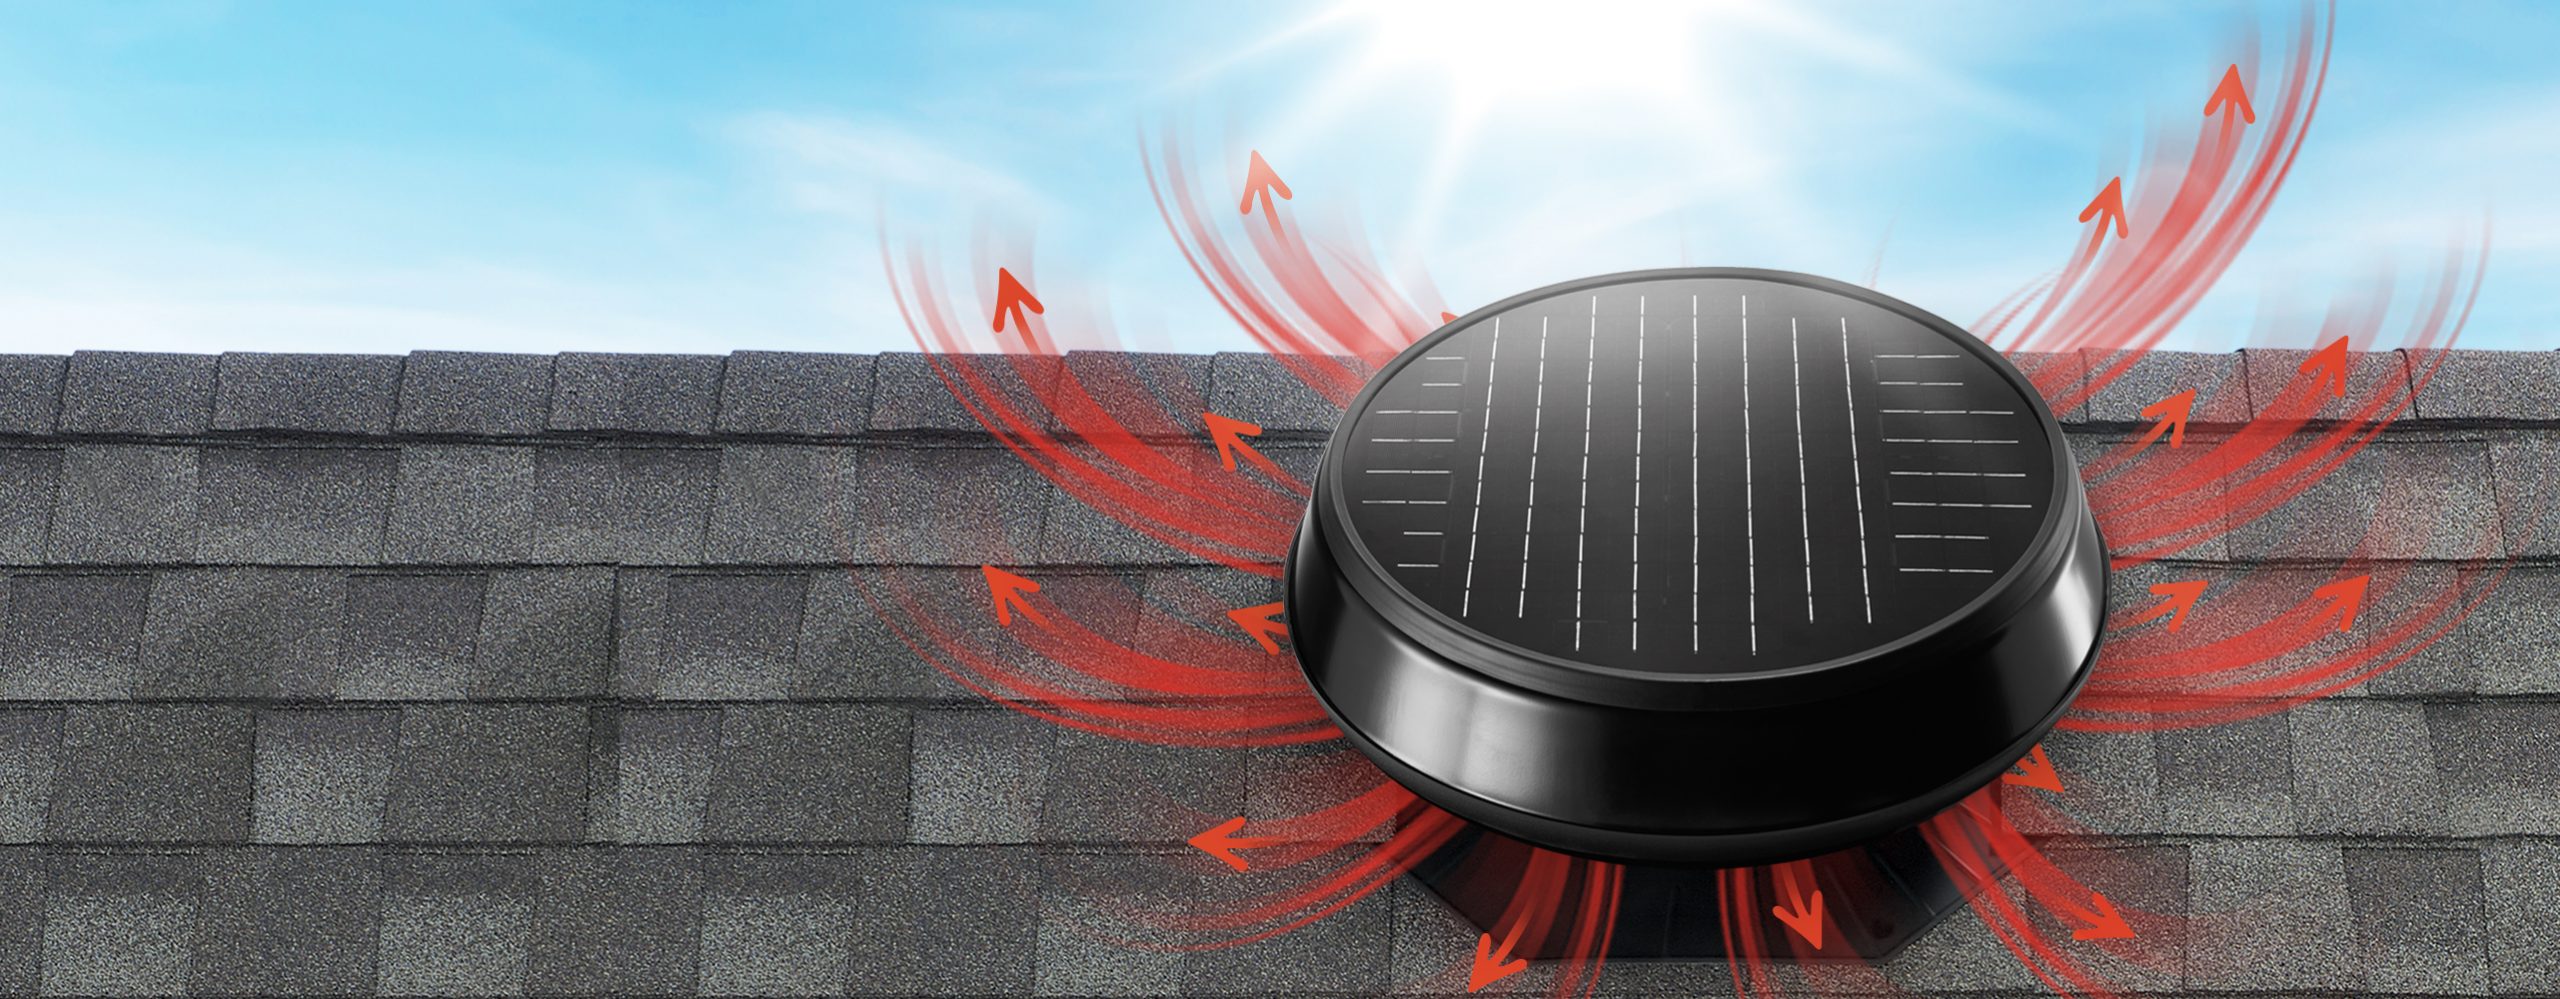 70W Solar Roof Air Vent Fan with Adjustable Frame for Industrial Warehouse  - China Solar Attic Fans, Roof Air Ventilation Fan